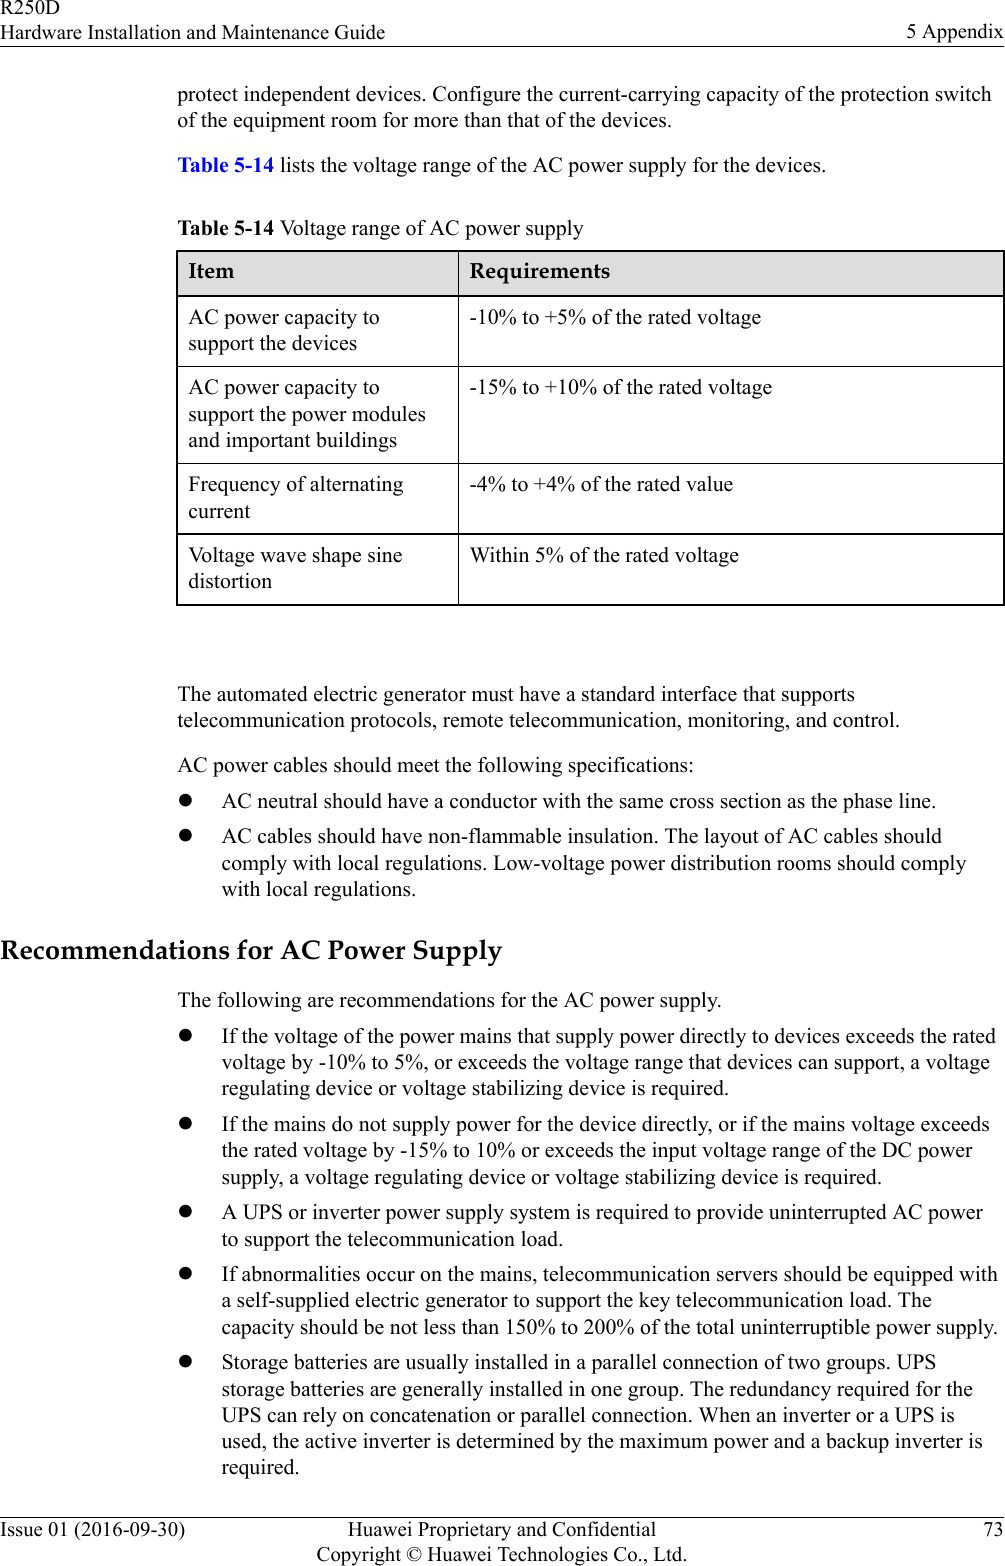 protect independent devices. Configure the current-carrying capacity of the protection switchof the equipment room for more than that of the devices.Table 5-14 lists the voltage range of the AC power supply for the devices.Table 5-14 Voltage range of AC power supplyItem RequirementsAC power capacity tosupport the devices-10% to +5% of the rated voltageAC power capacity tosupport the power modulesand important buildings-15% to +10% of the rated voltageFrequency of alternatingcurrent-4% to +4% of the rated valueVoltage wave shape sinedistortionWithin 5% of the rated voltage The automated electric generator must have a standard interface that supportstelecommunication protocols, remote telecommunication, monitoring, and control.AC power cables should meet the following specifications:lAC neutral should have a conductor with the same cross section as the phase line.lAC cables should have non-flammable insulation. The layout of AC cables shouldcomply with local regulations. Low-voltage power distribution rooms should complywith local regulations.Recommendations for AC Power SupplyThe following are recommendations for the AC power supply.lIf the voltage of the power mains that supply power directly to devices exceeds the ratedvoltage by -10% to 5%, or exceeds the voltage range that devices can support, a voltageregulating device or voltage stabilizing device is required.lIf the mains do not supply power for the device directly, or if the mains voltage exceedsthe rated voltage by -15% to 10% or exceeds the input voltage range of the DC powersupply, a voltage regulating device or voltage stabilizing device is required.lA UPS or inverter power supply system is required to provide uninterrupted AC powerto support the telecommunication load.lIf abnormalities occur on the mains, telecommunication servers should be equipped witha self-supplied electric generator to support the key telecommunication load. Thecapacity should be not less than 150% to 200% of the total uninterruptible power supply.lStorage batteries are usually installed in a parallel connection of two groups. UPSstorage batteries are generally installed in one group. The redundancy required for theUPS can rely on concatenation or parallel connection. When an inverter or a UPS isused, the active inverter is determined by the maximum power and a backup inverter isrequired.R250DHardware Installation and Maintenance Guide 5 AppendixIssue 01 (2016-09-30) Huawei Proprietary and ConfidentialCopyright © Huawei Technologies Co., Ltd.73